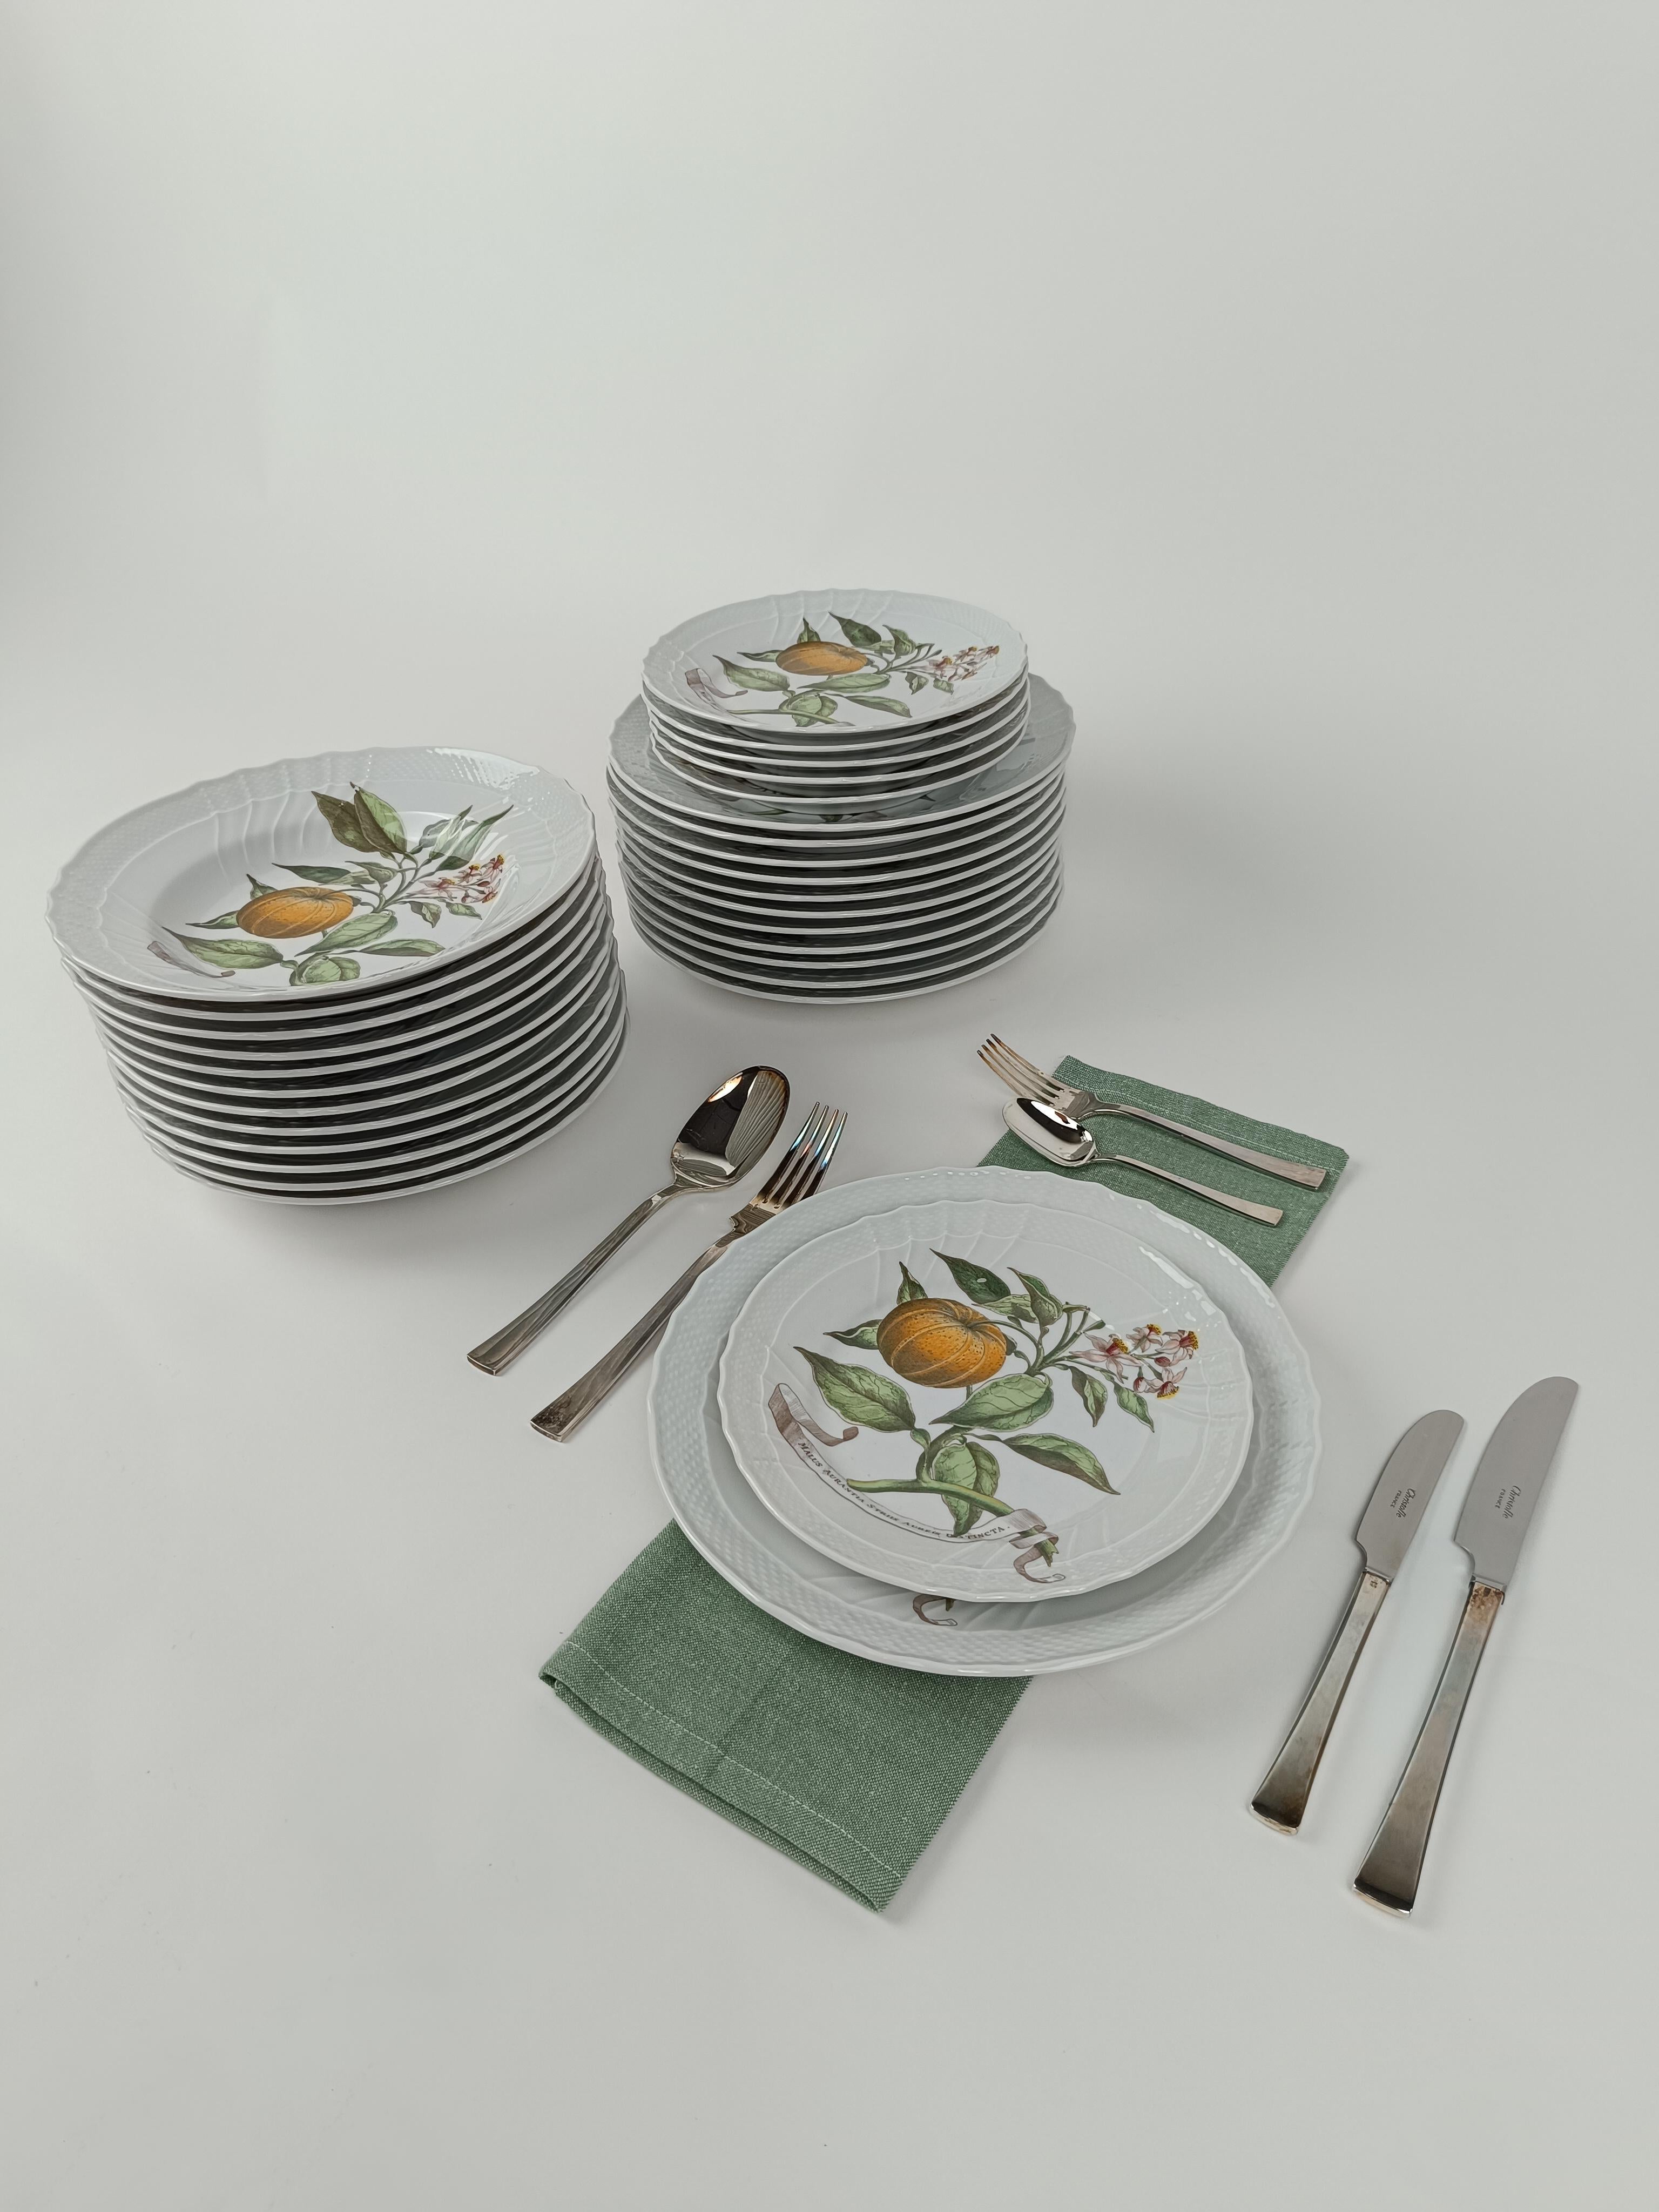 Italian Richard Ginori China Dinner Service with a botanical print by Munting Abraham For Sale